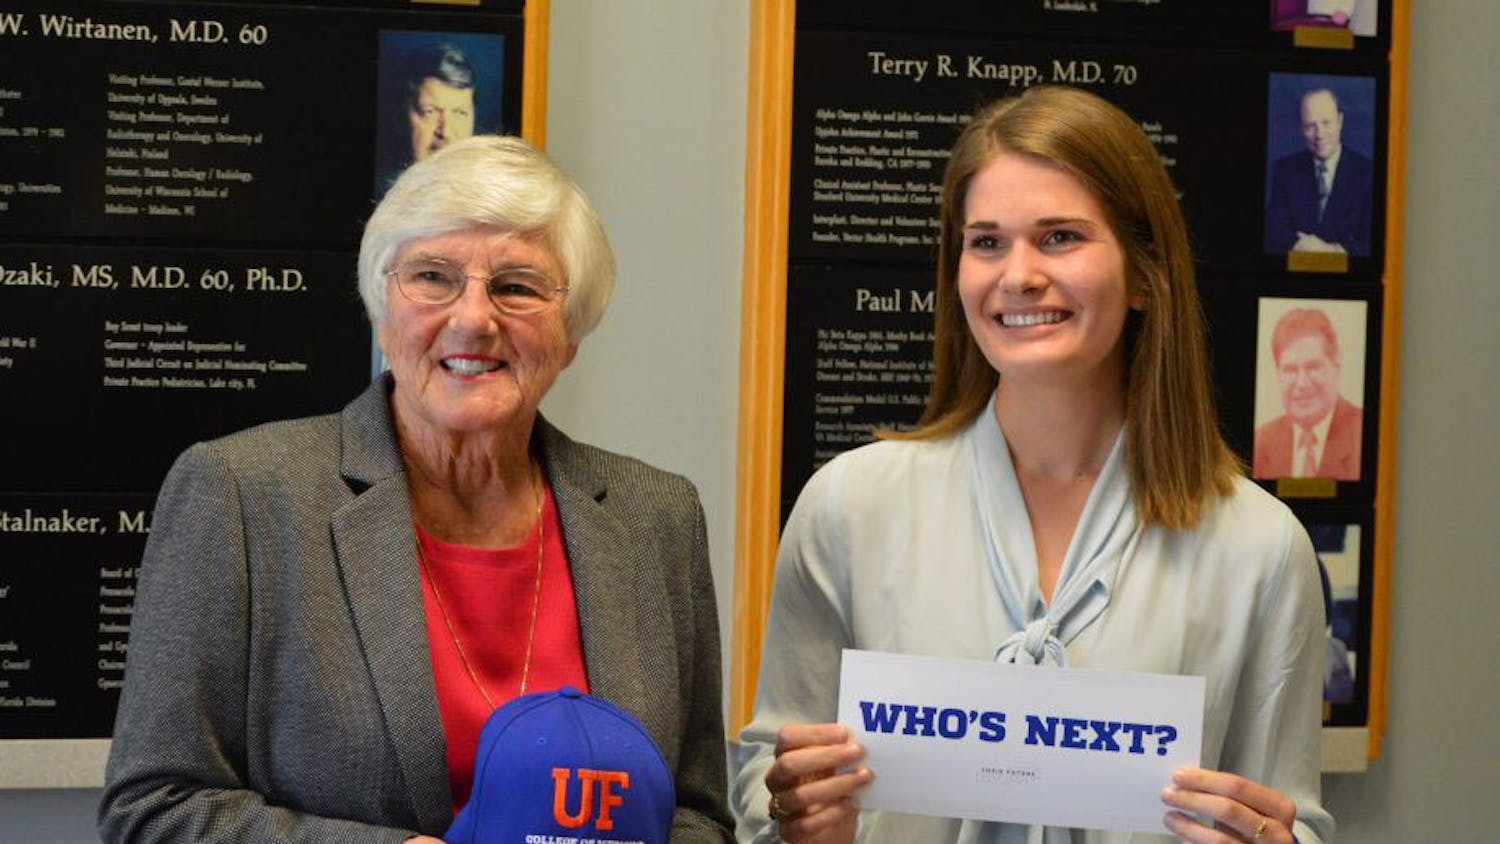 The first woman graduate of the UF College of Medicine, 81-year-old Dr. Jean Bennett, and Jane Harrell, a 23-year-old UF medical student, pose at a scholarship award ceremony in February. Harrell was awarded a yearly $5,000 scholarship named after Bennett.